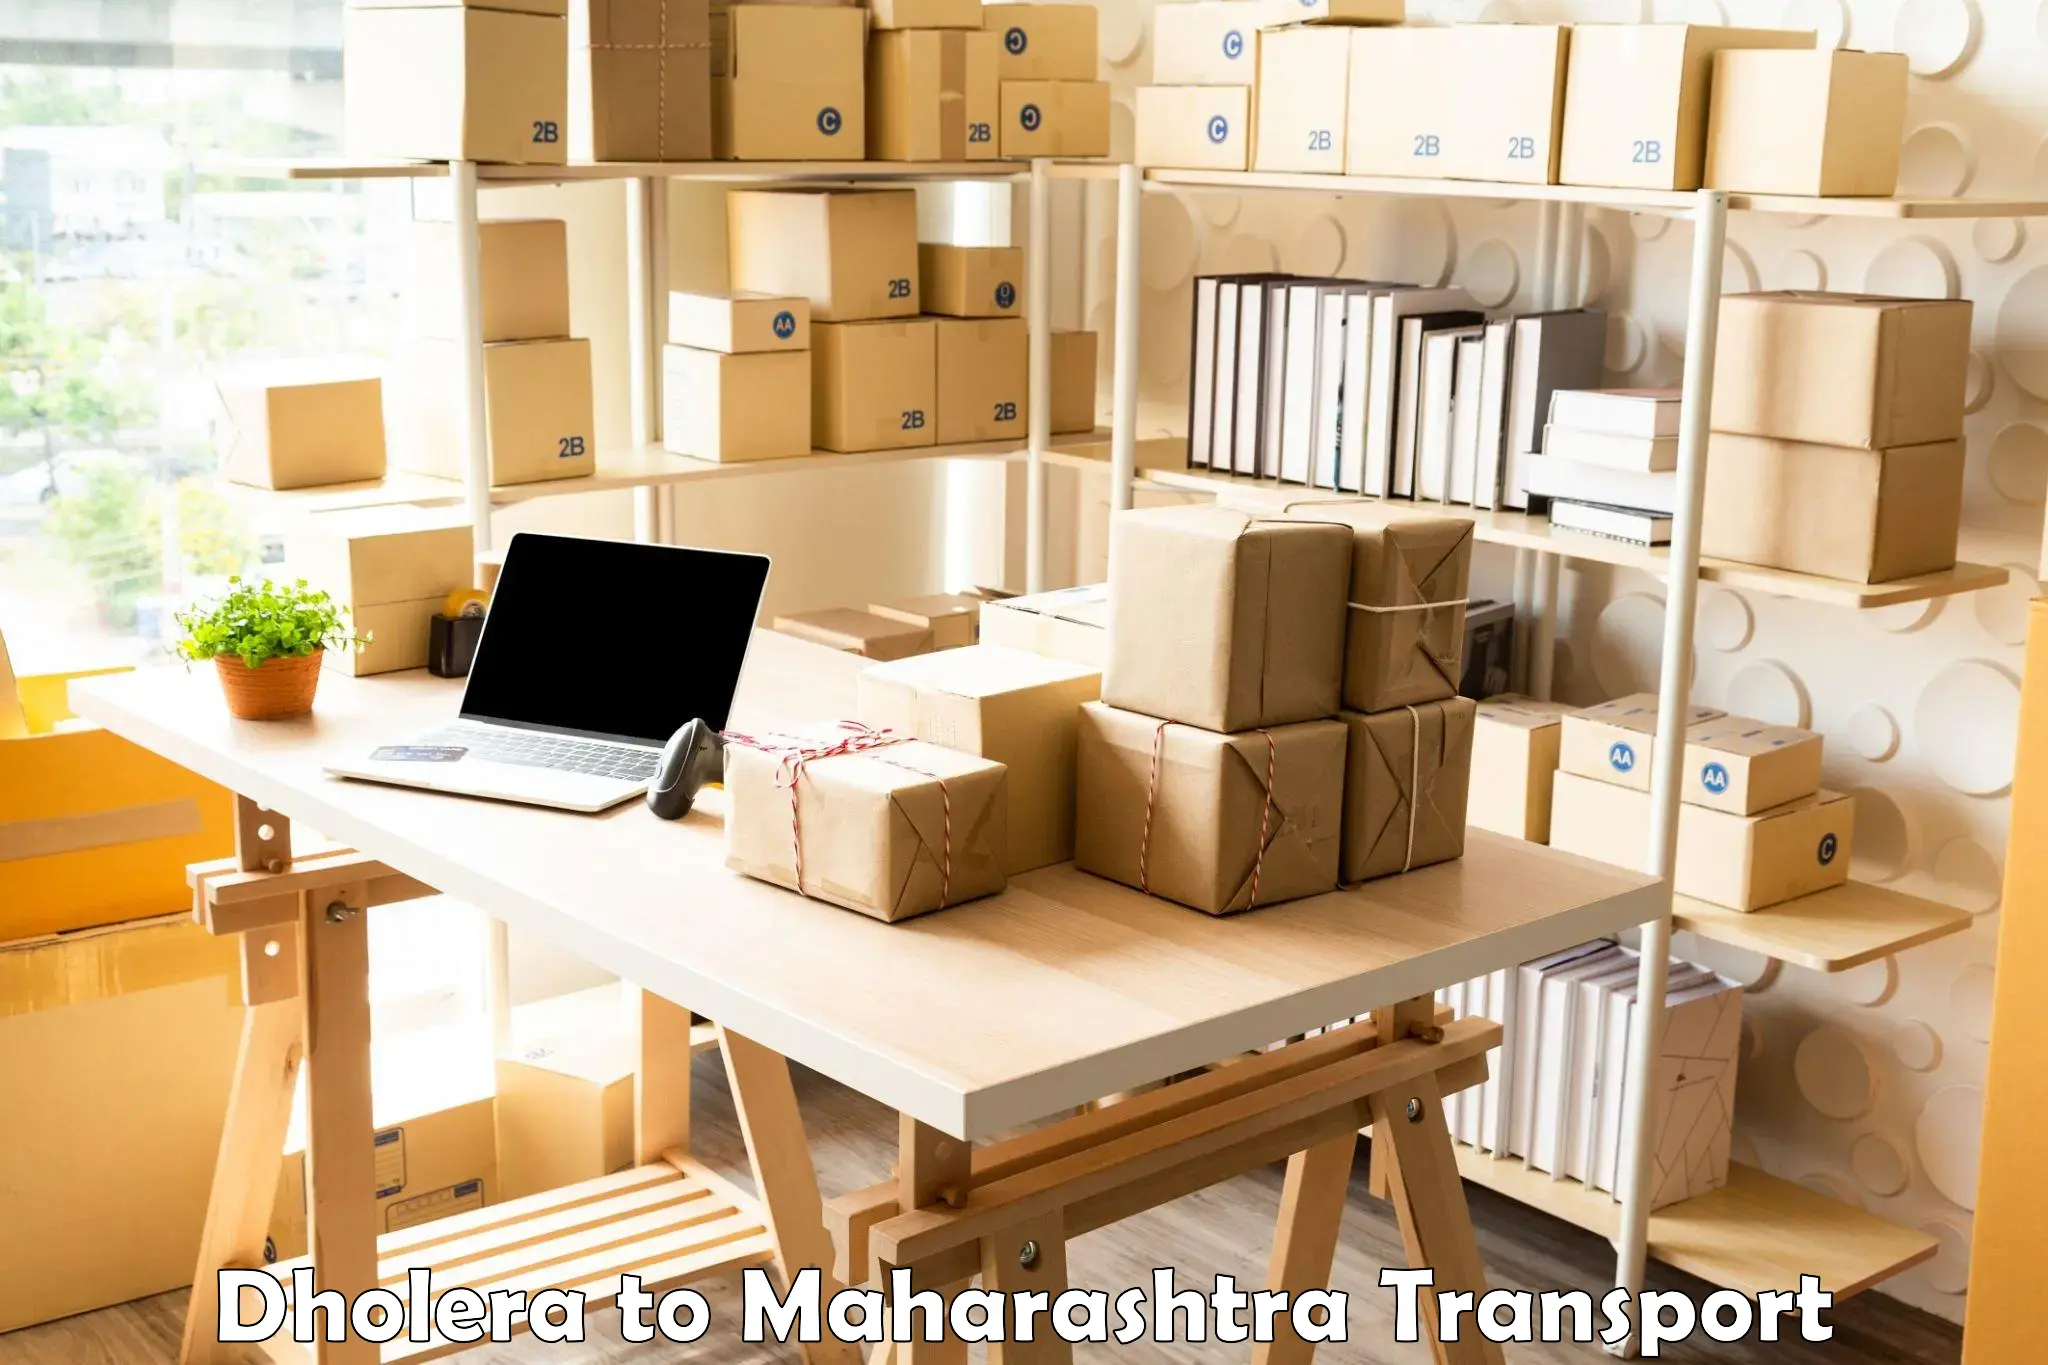 Goods delivery service Dholera to Chalisgaon